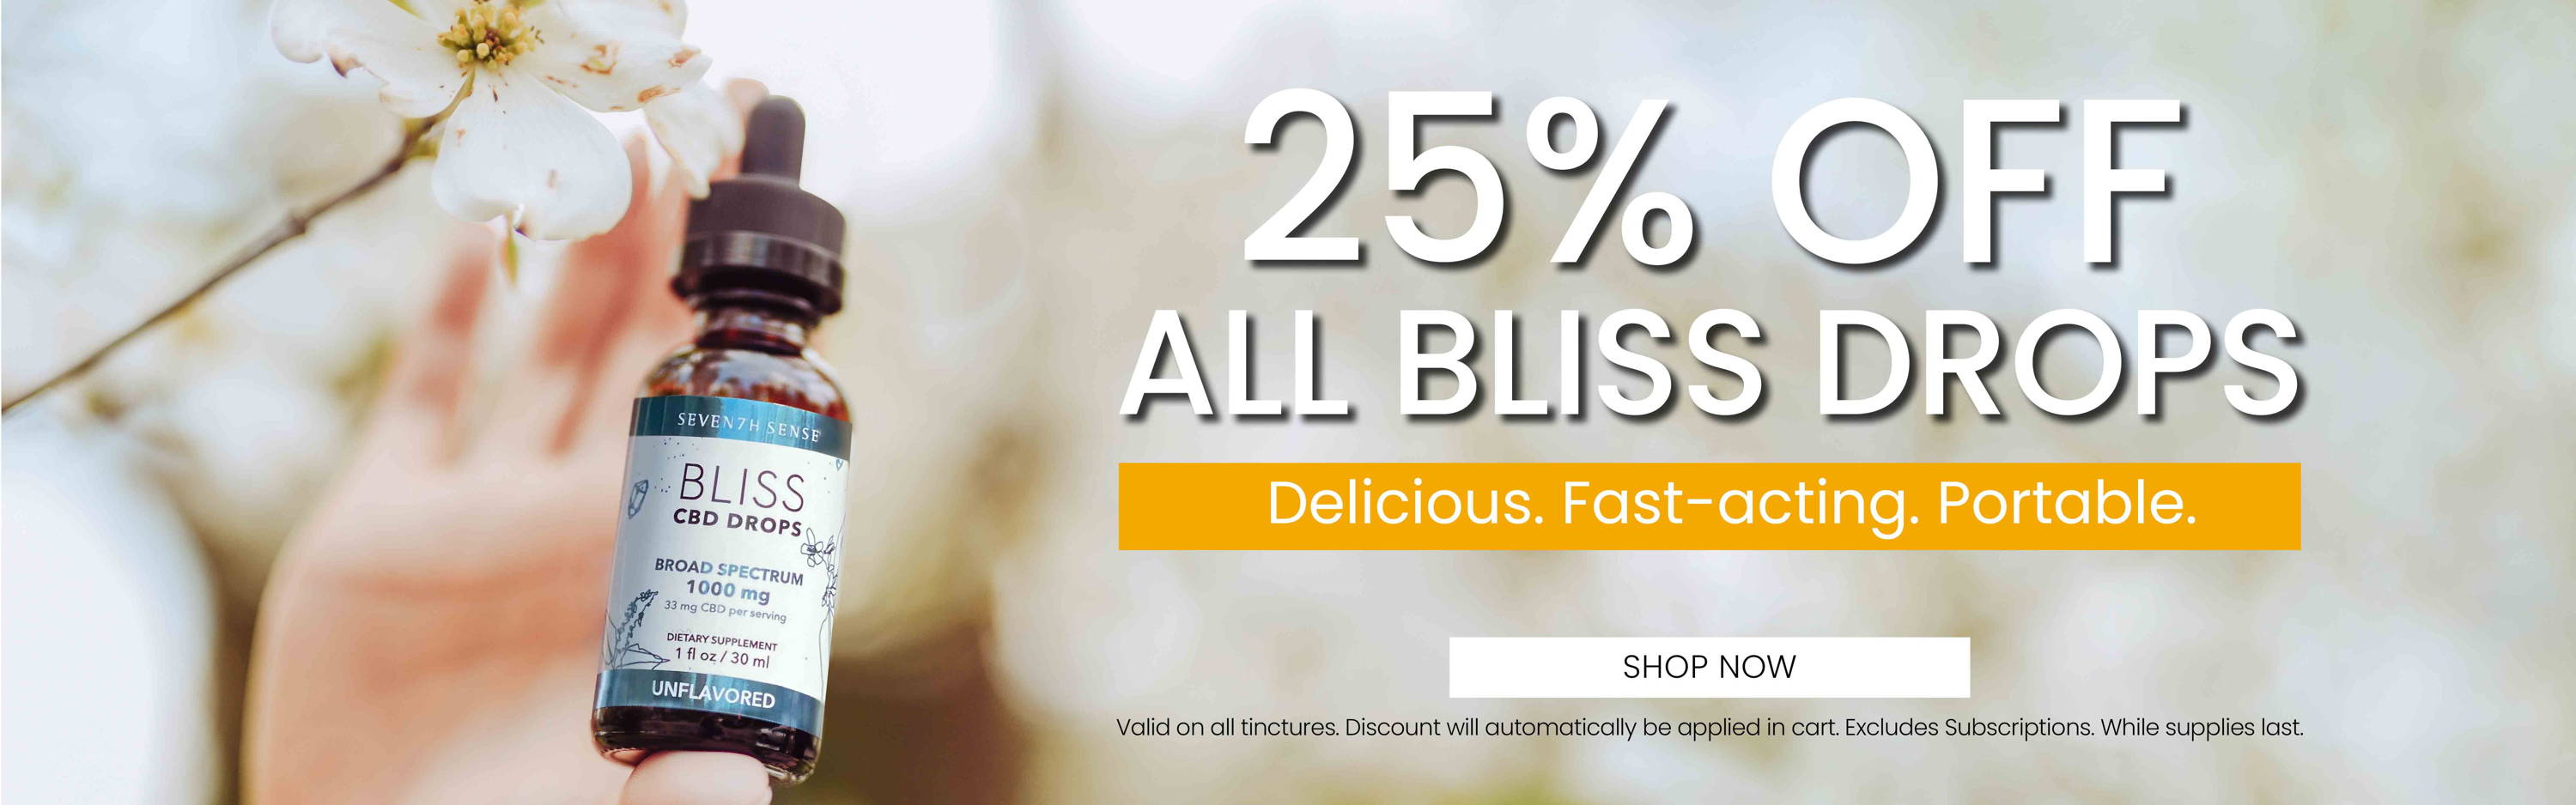 25% Off All Bliss Drops. Shop Now.